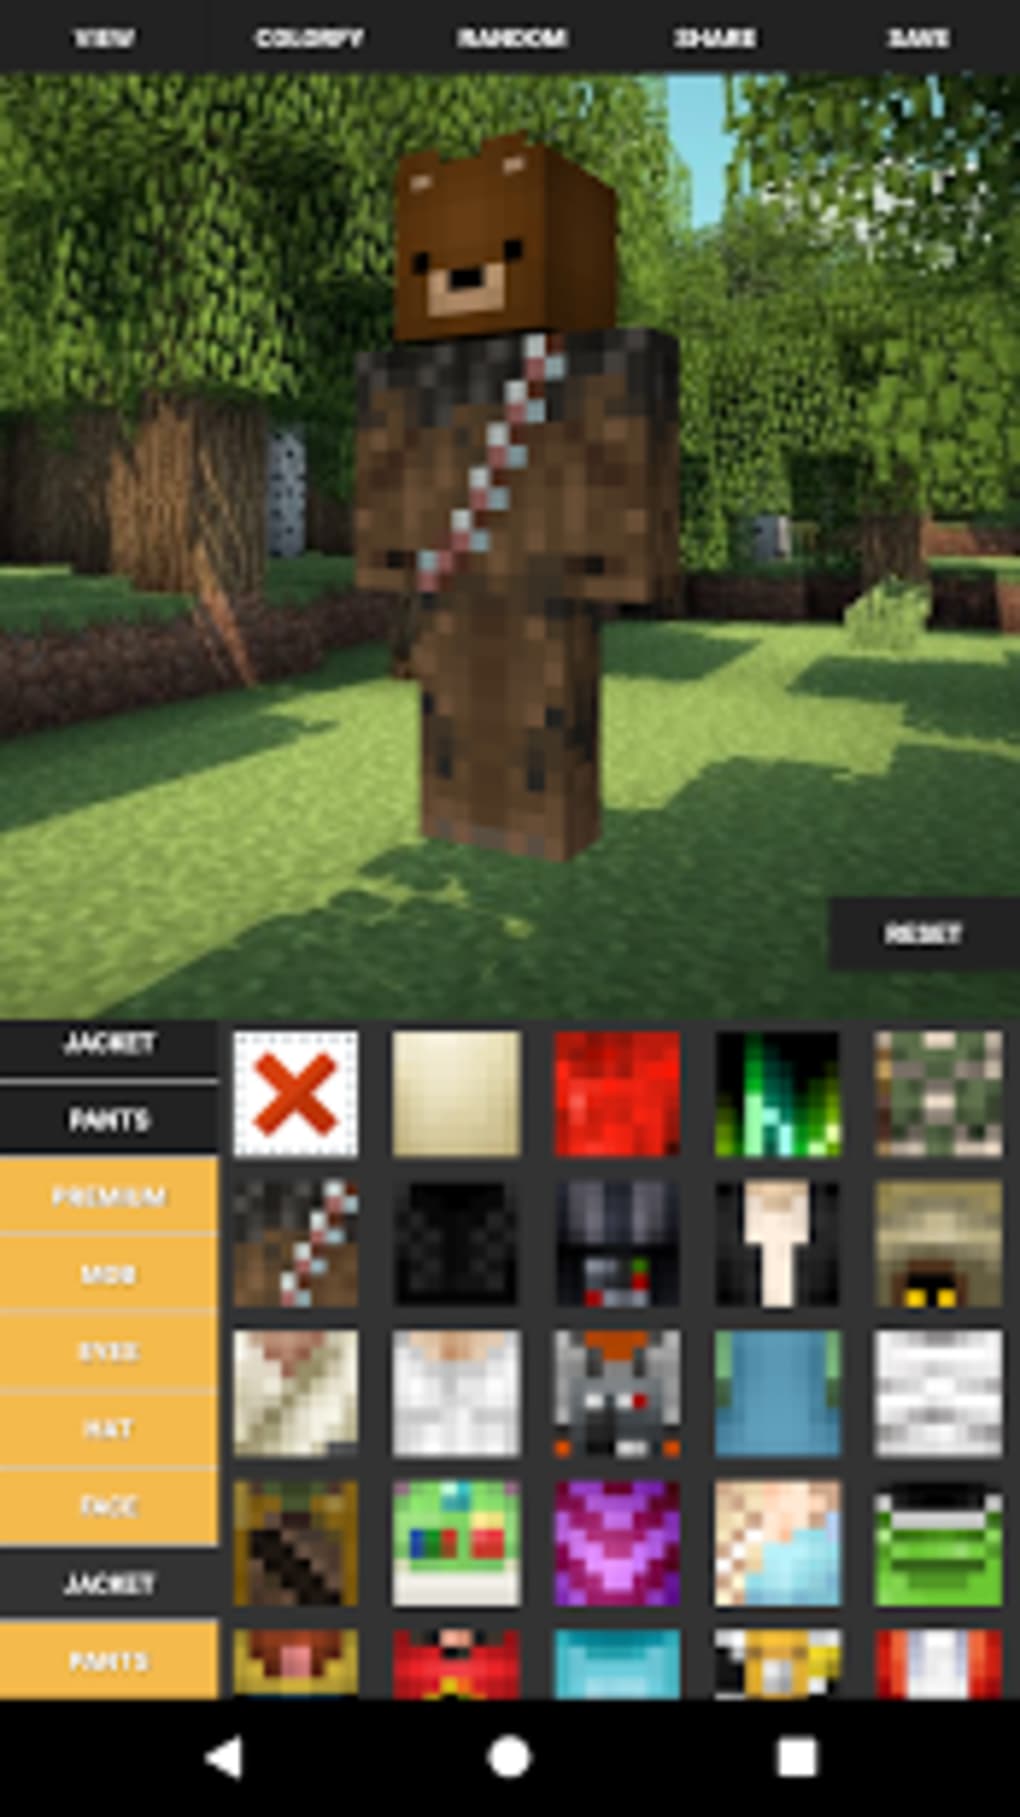 Download Skin Editor for Minecraft/MCPE for android 4.4.4